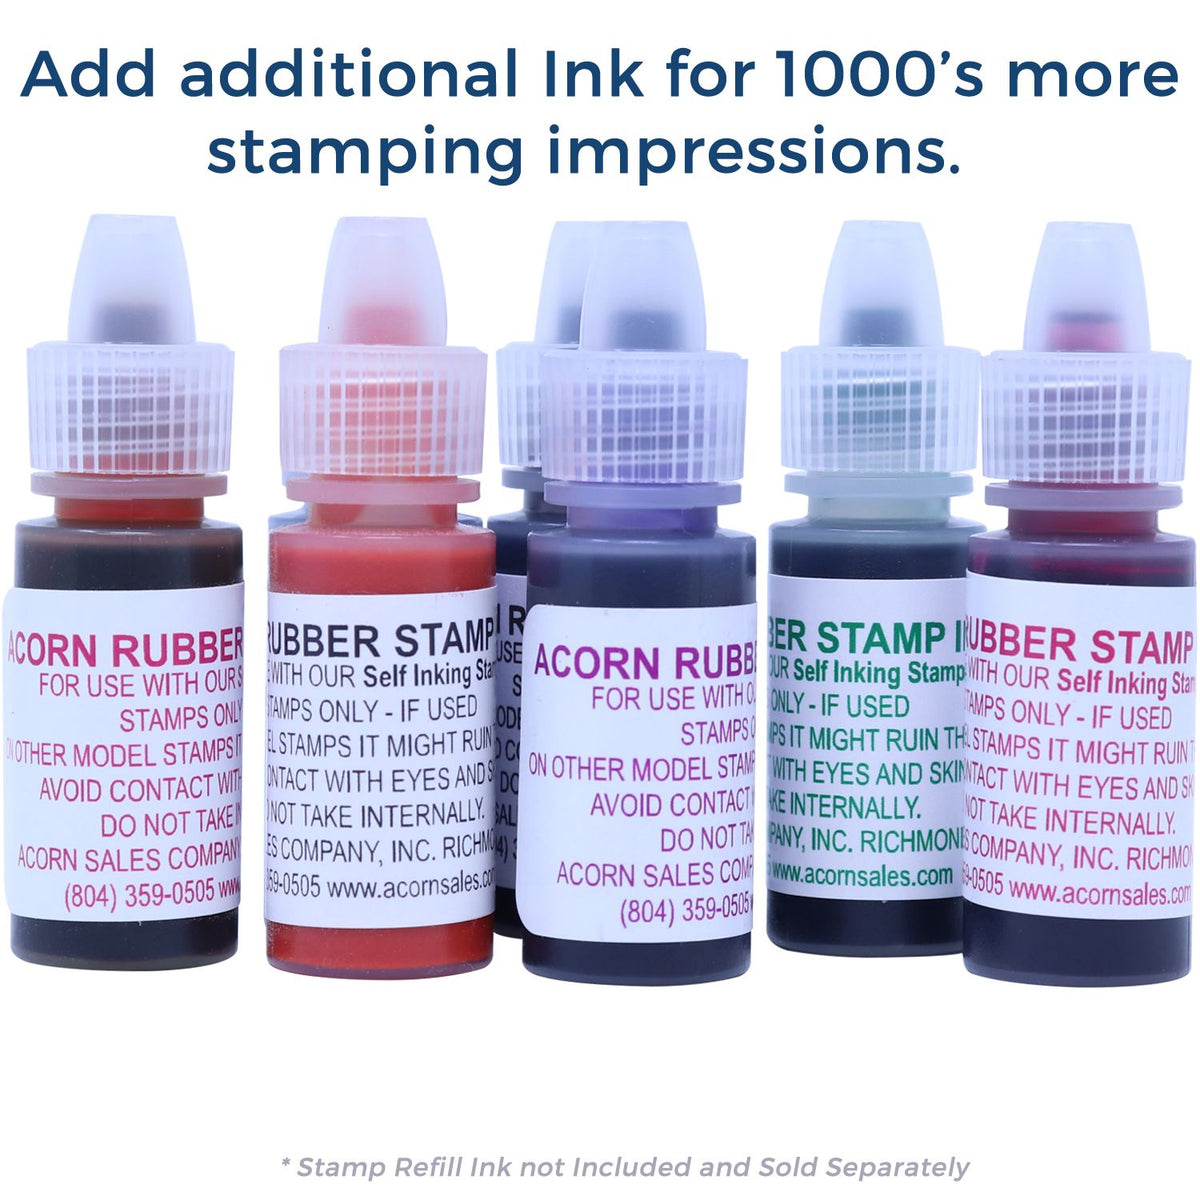 Refill Ink for Self-Inking Round File Stamp Available